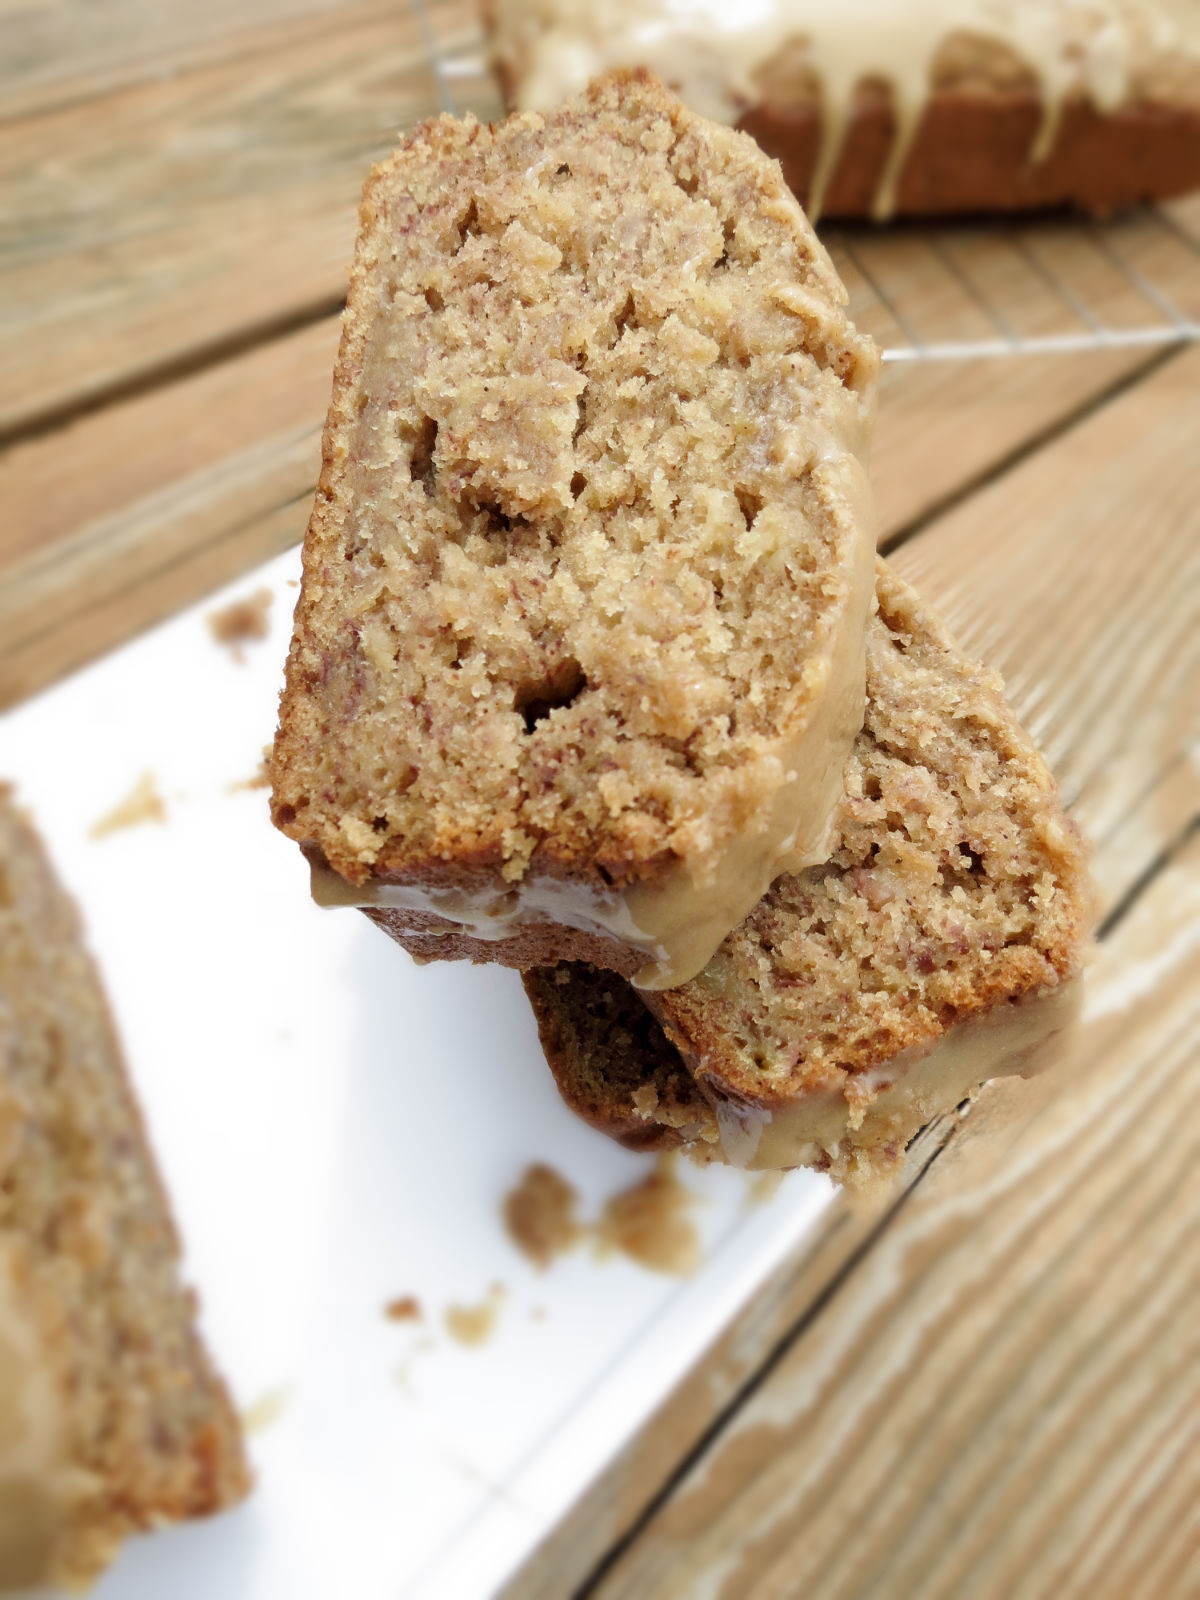 Banana Bread Recipe With Brown Sugar
 The Best Moist Banana Bread With Brown Sugar Glaze